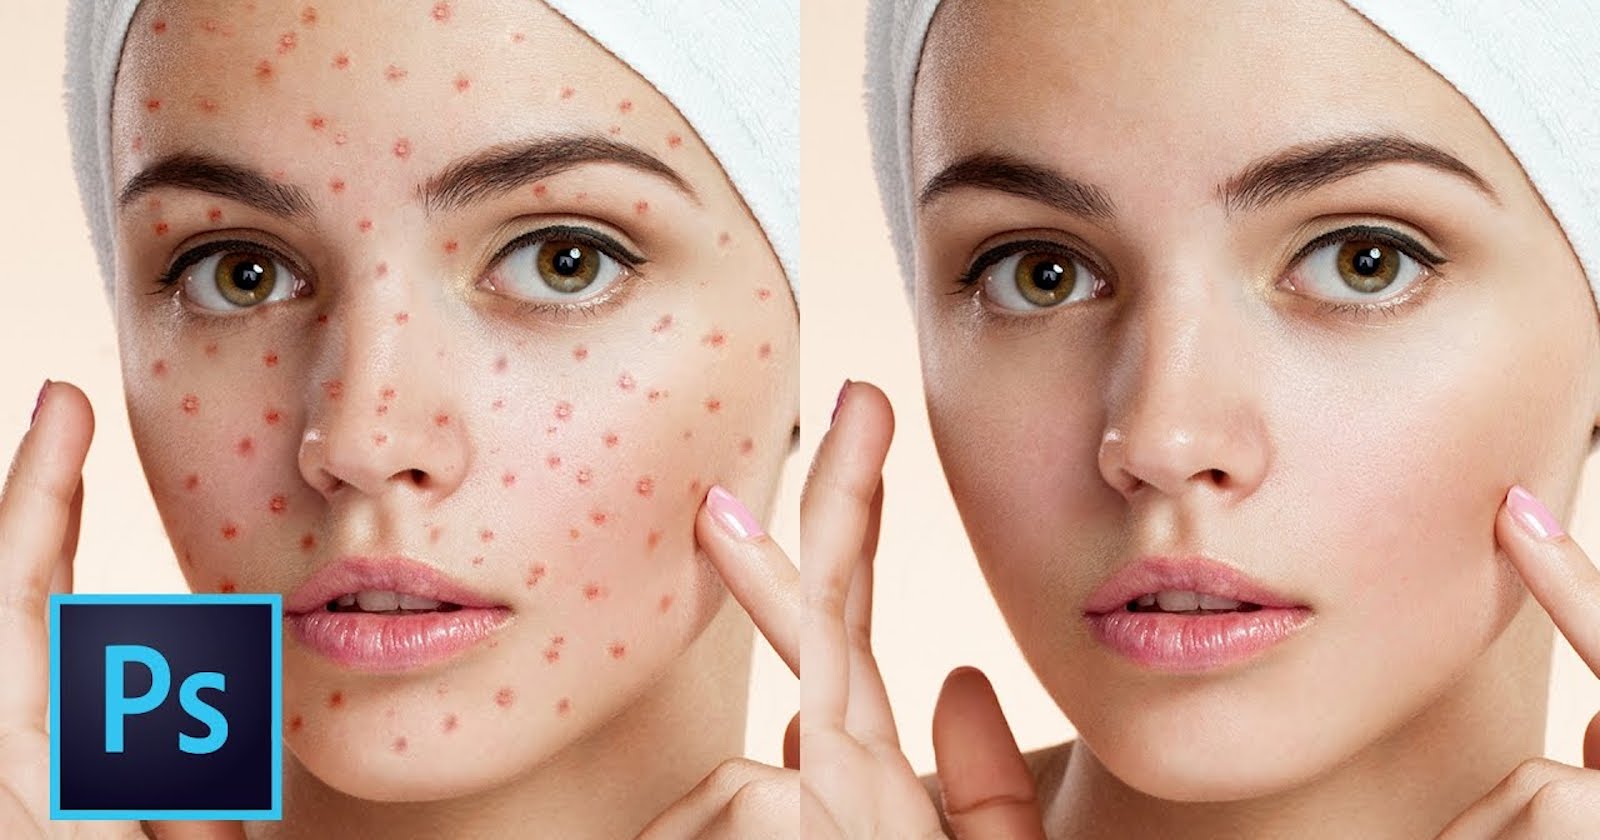 Photoshop Tutorial: The 5 Best Ways to Clean and Heal Skin Blemishes